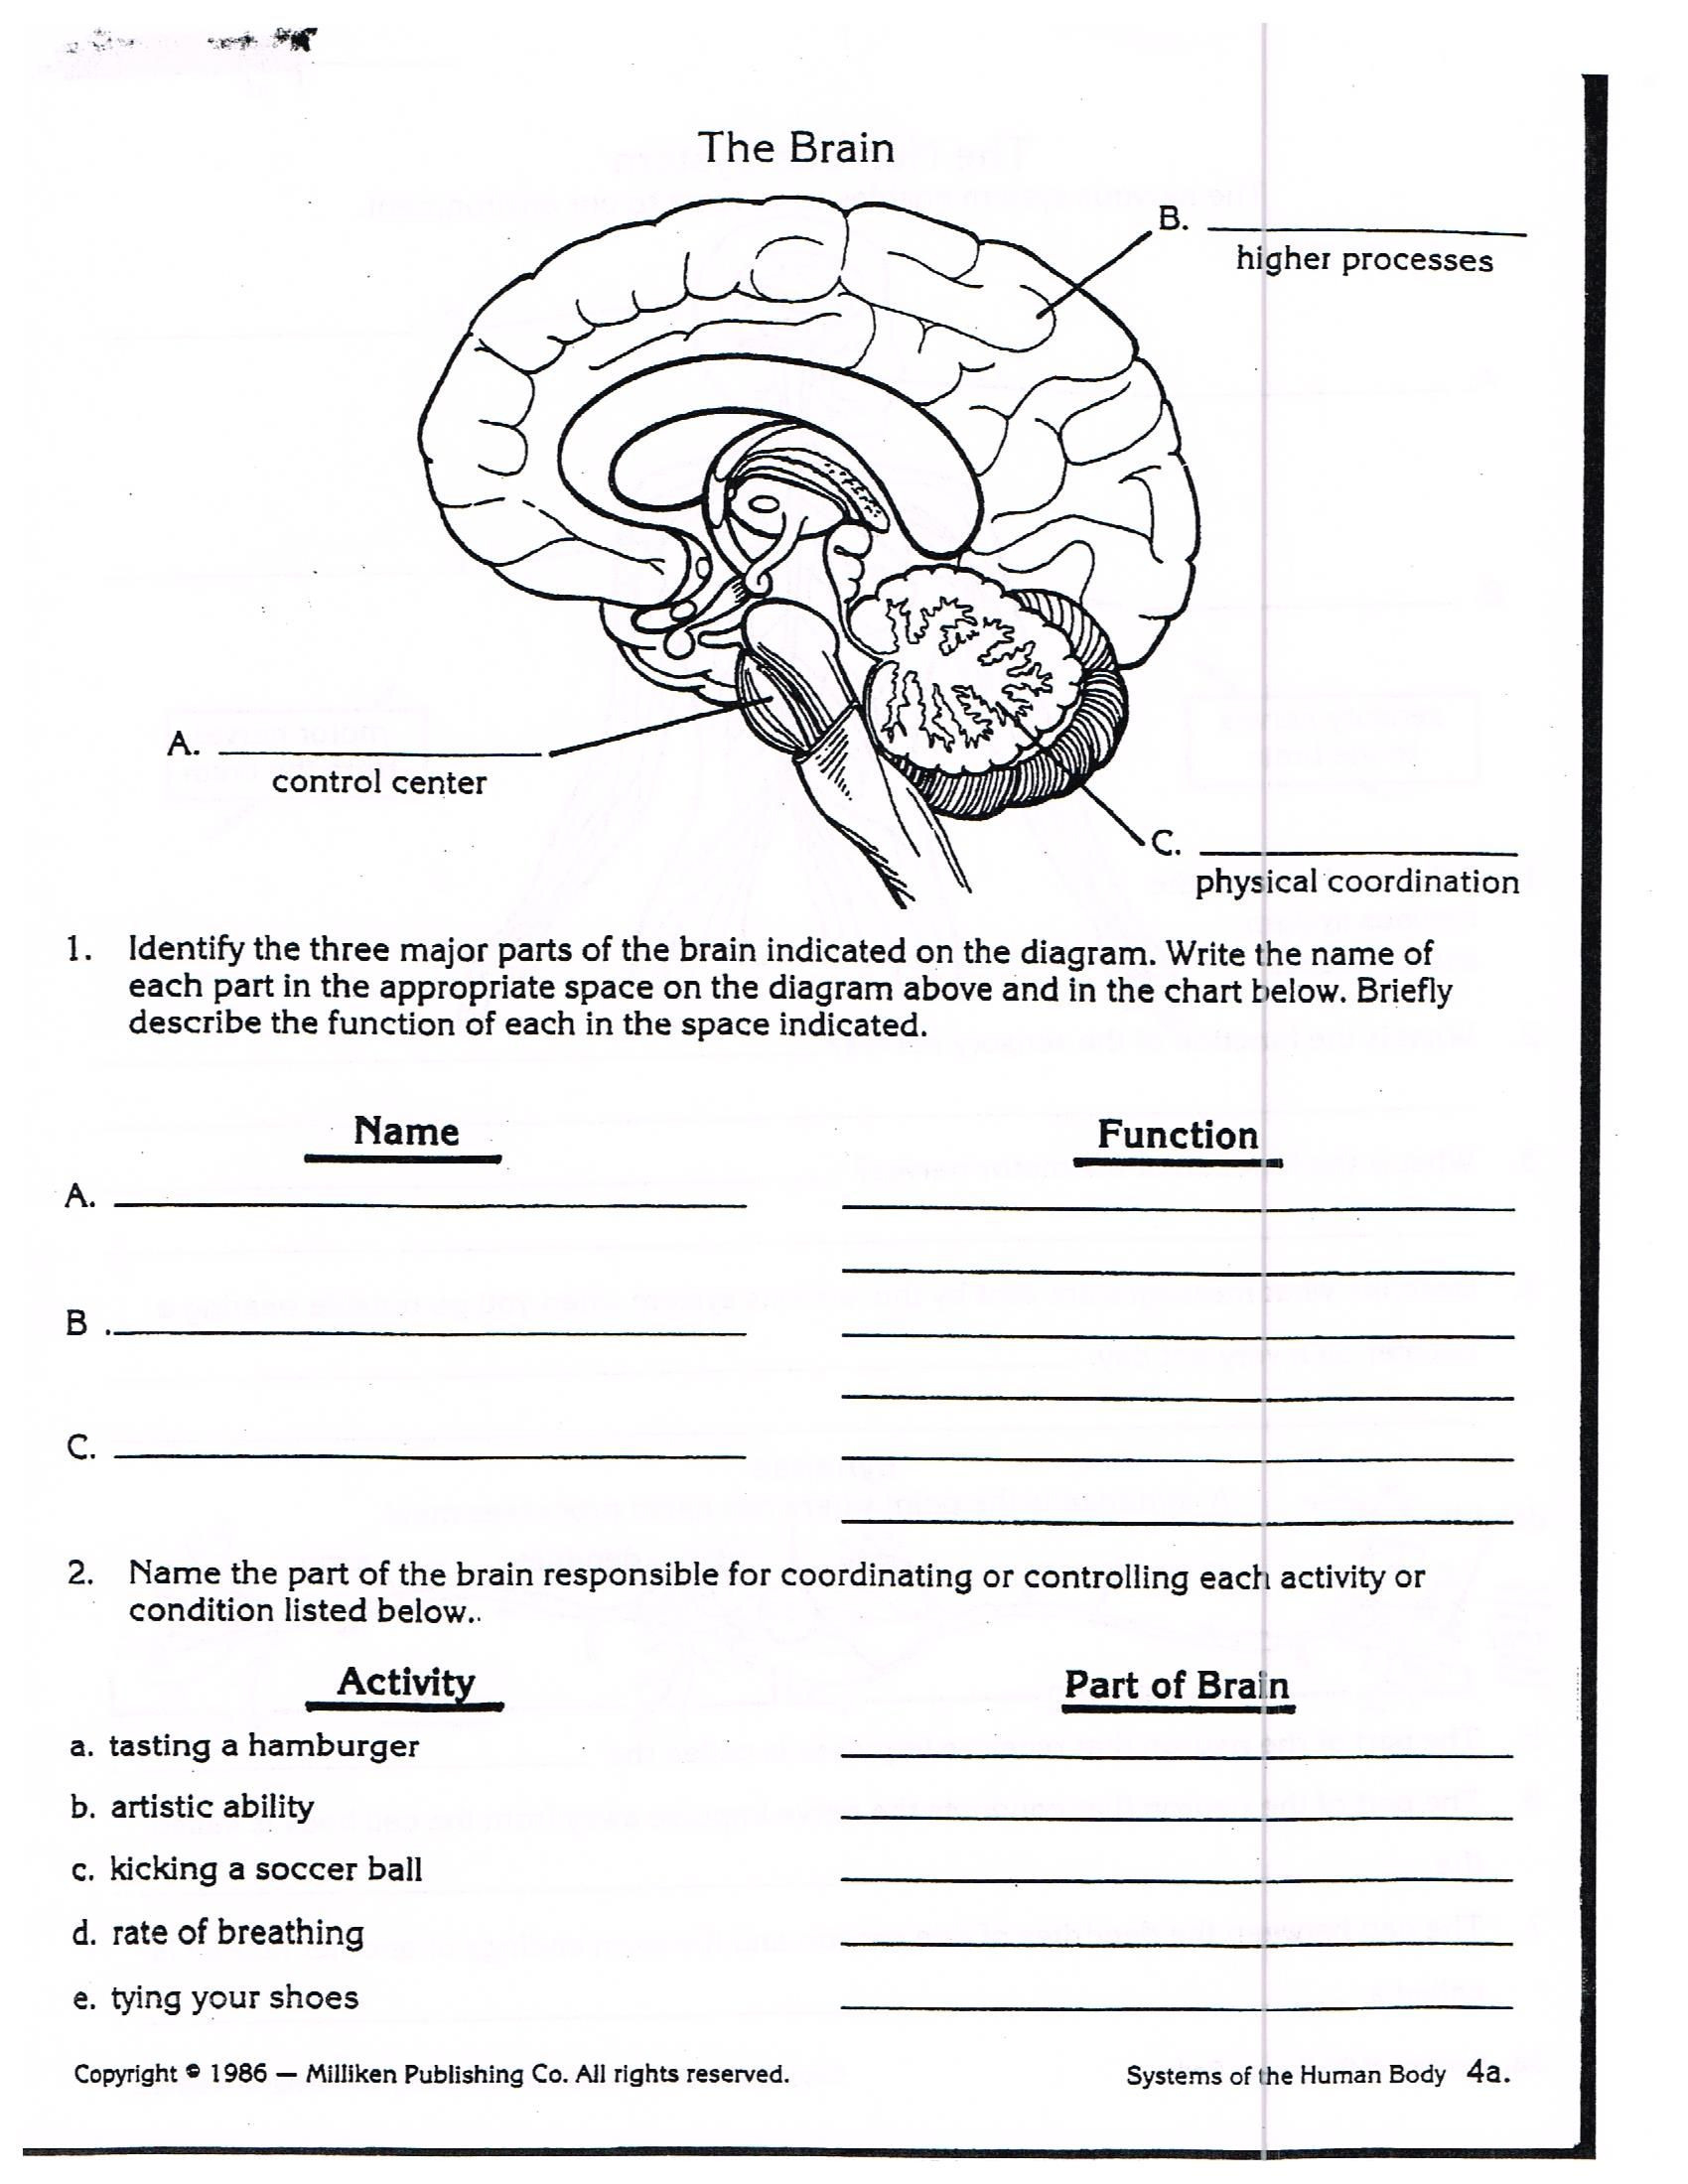 Color The Brain Worksheet Answers